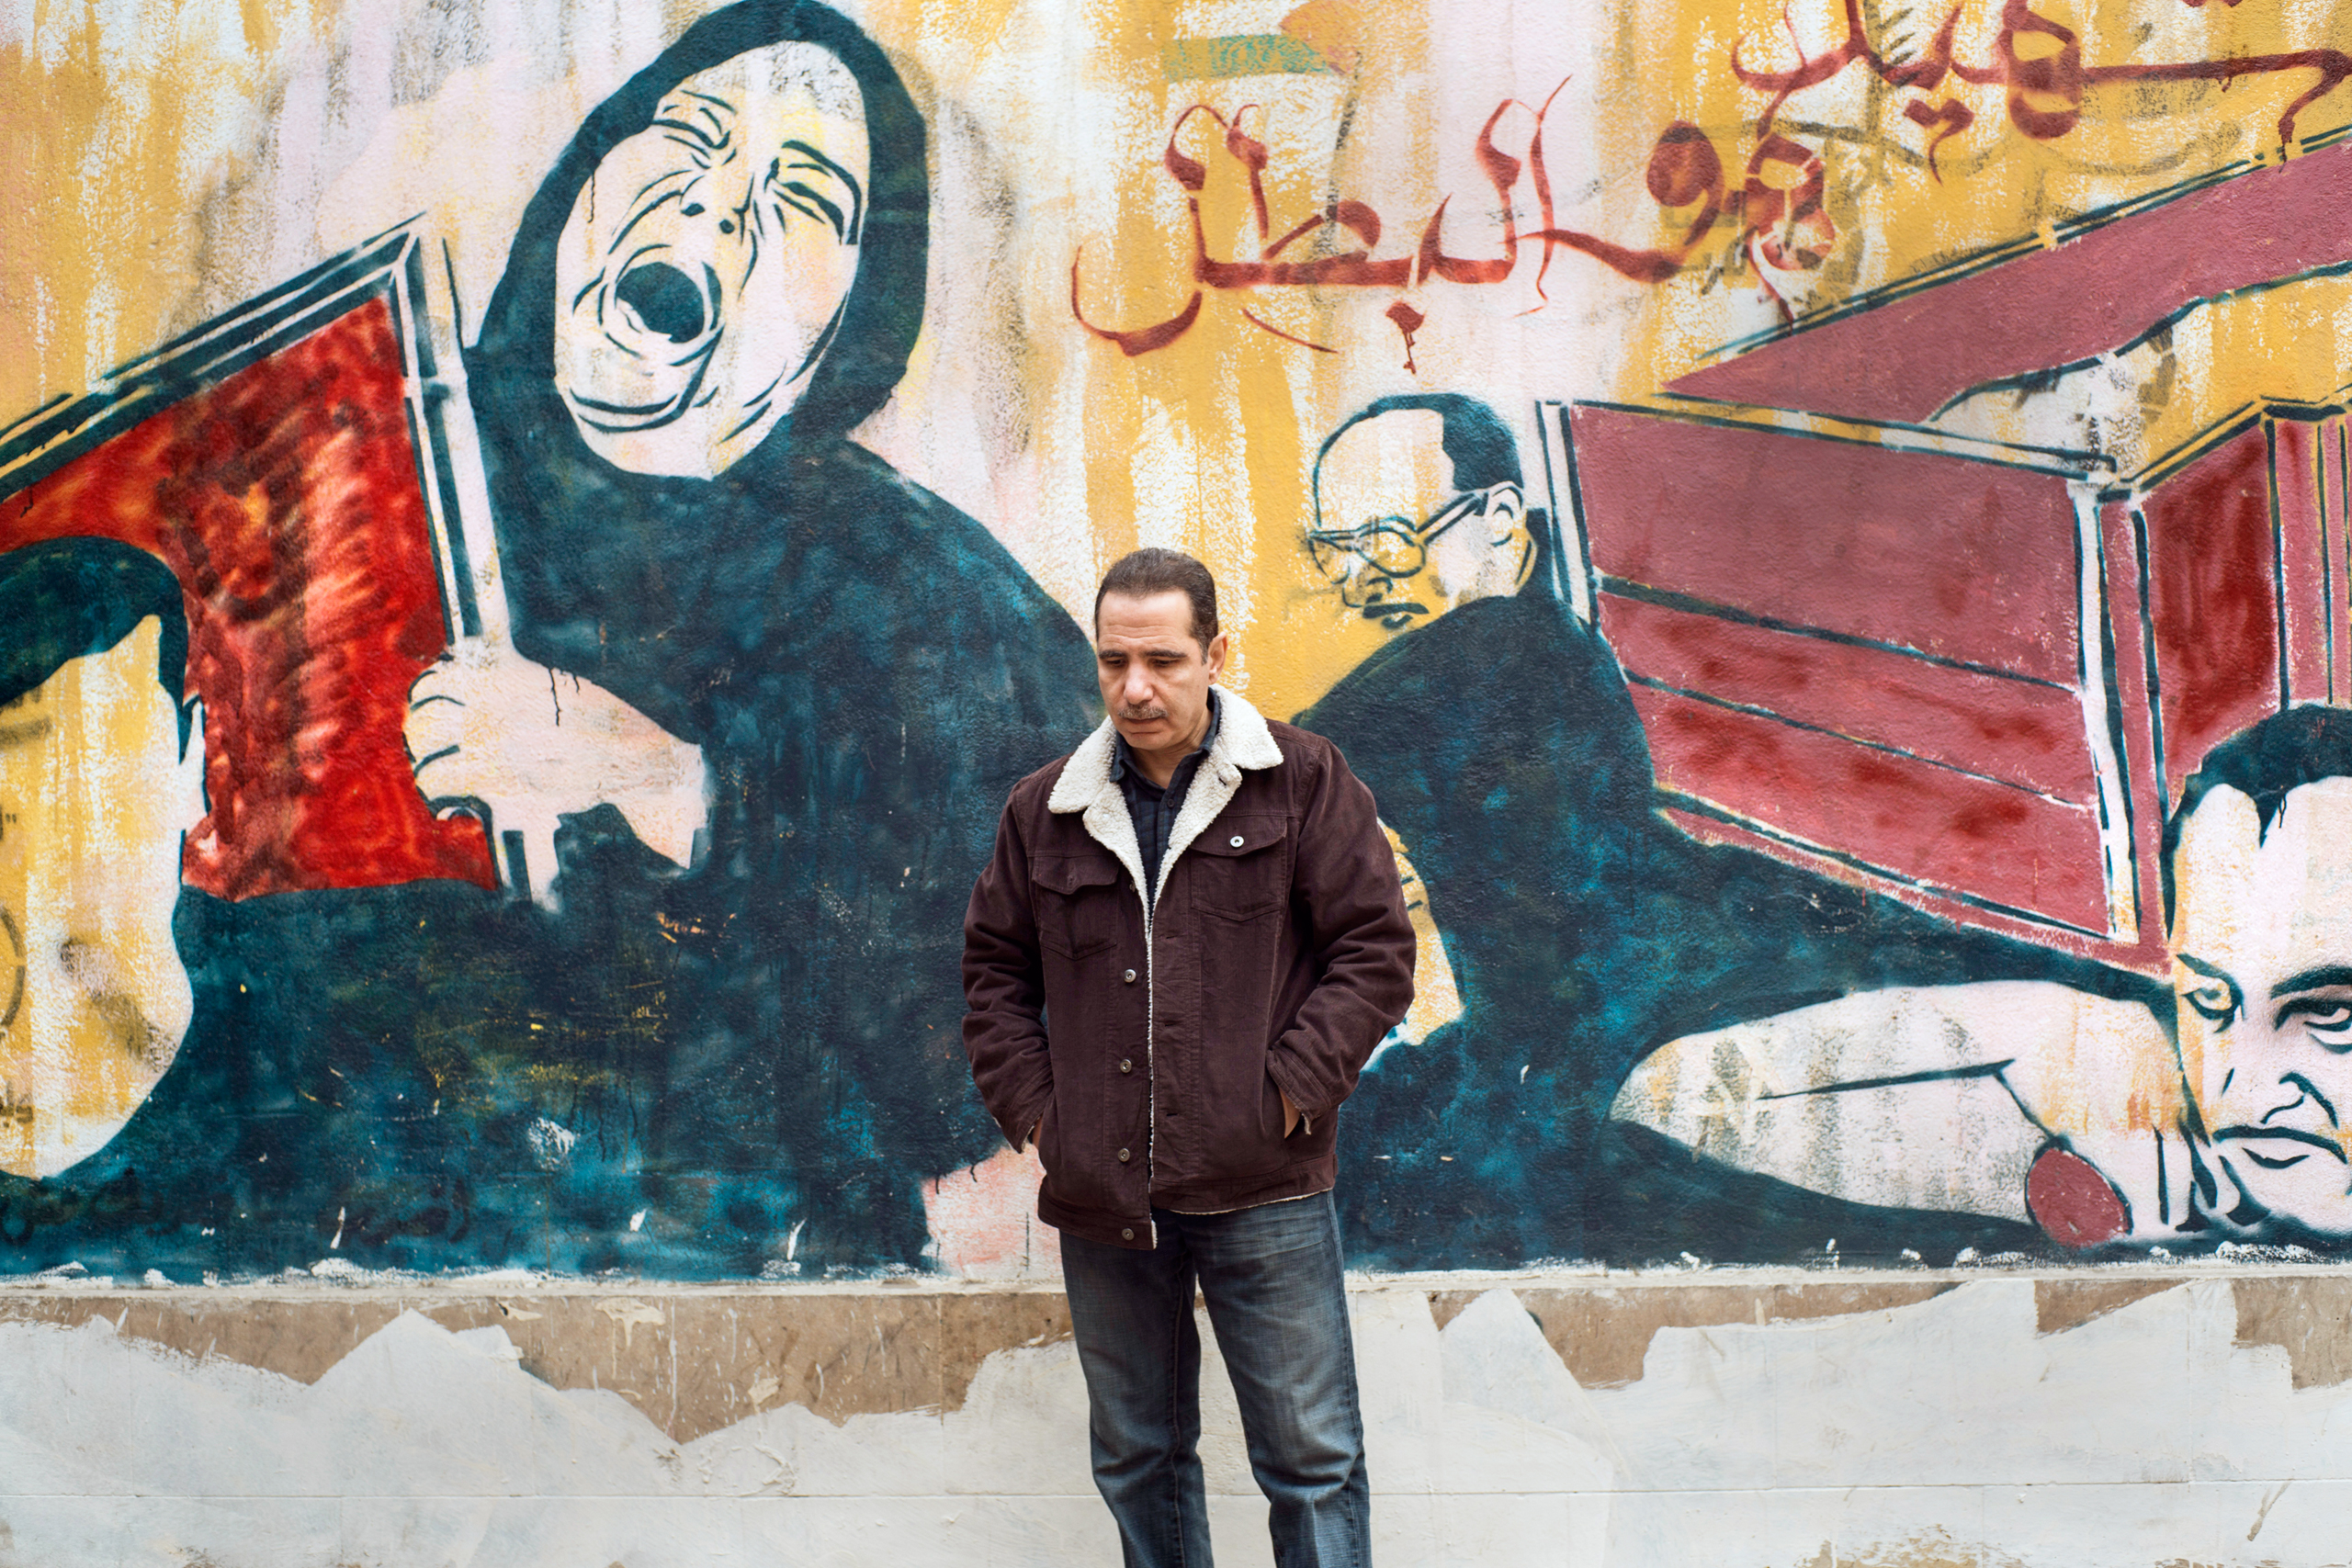 Ali Hassan Ali became an activist for reform after his son was killed by government security forces during the 2011 protests in Cairo
                      
                      (David Degner / Time Magazine) (David Degner for TIME)